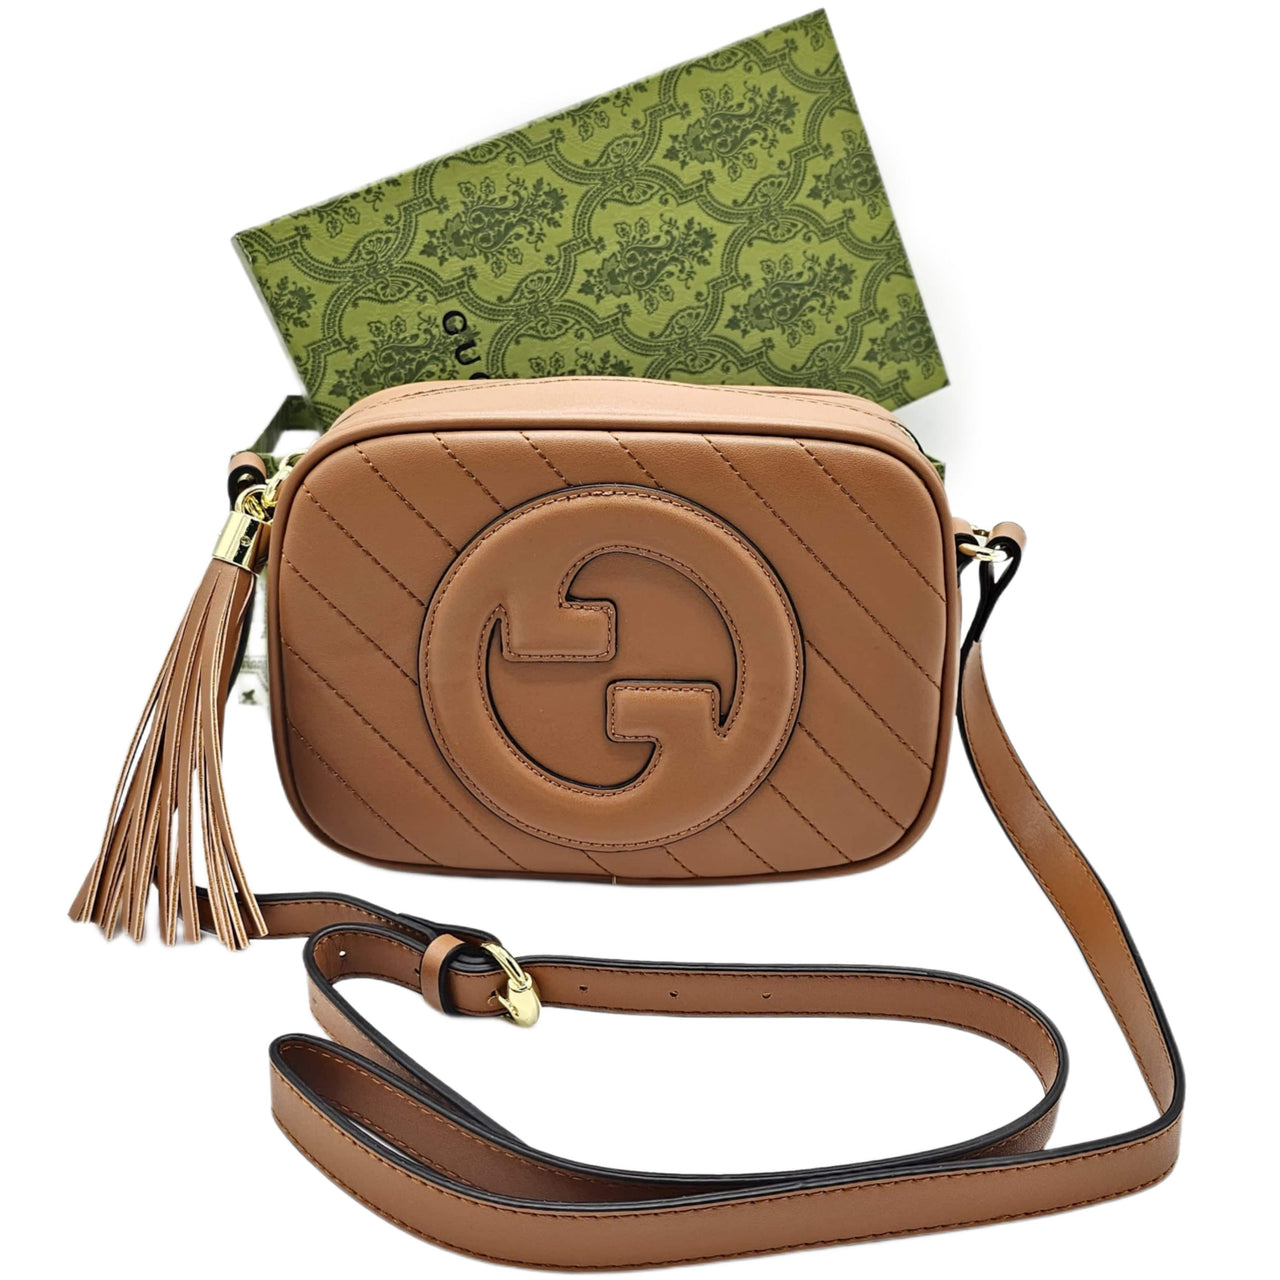 The Bag Couture Handbags, Wallets & Cases Gucci Blondie Shoulder / Crossbody Bag Brown